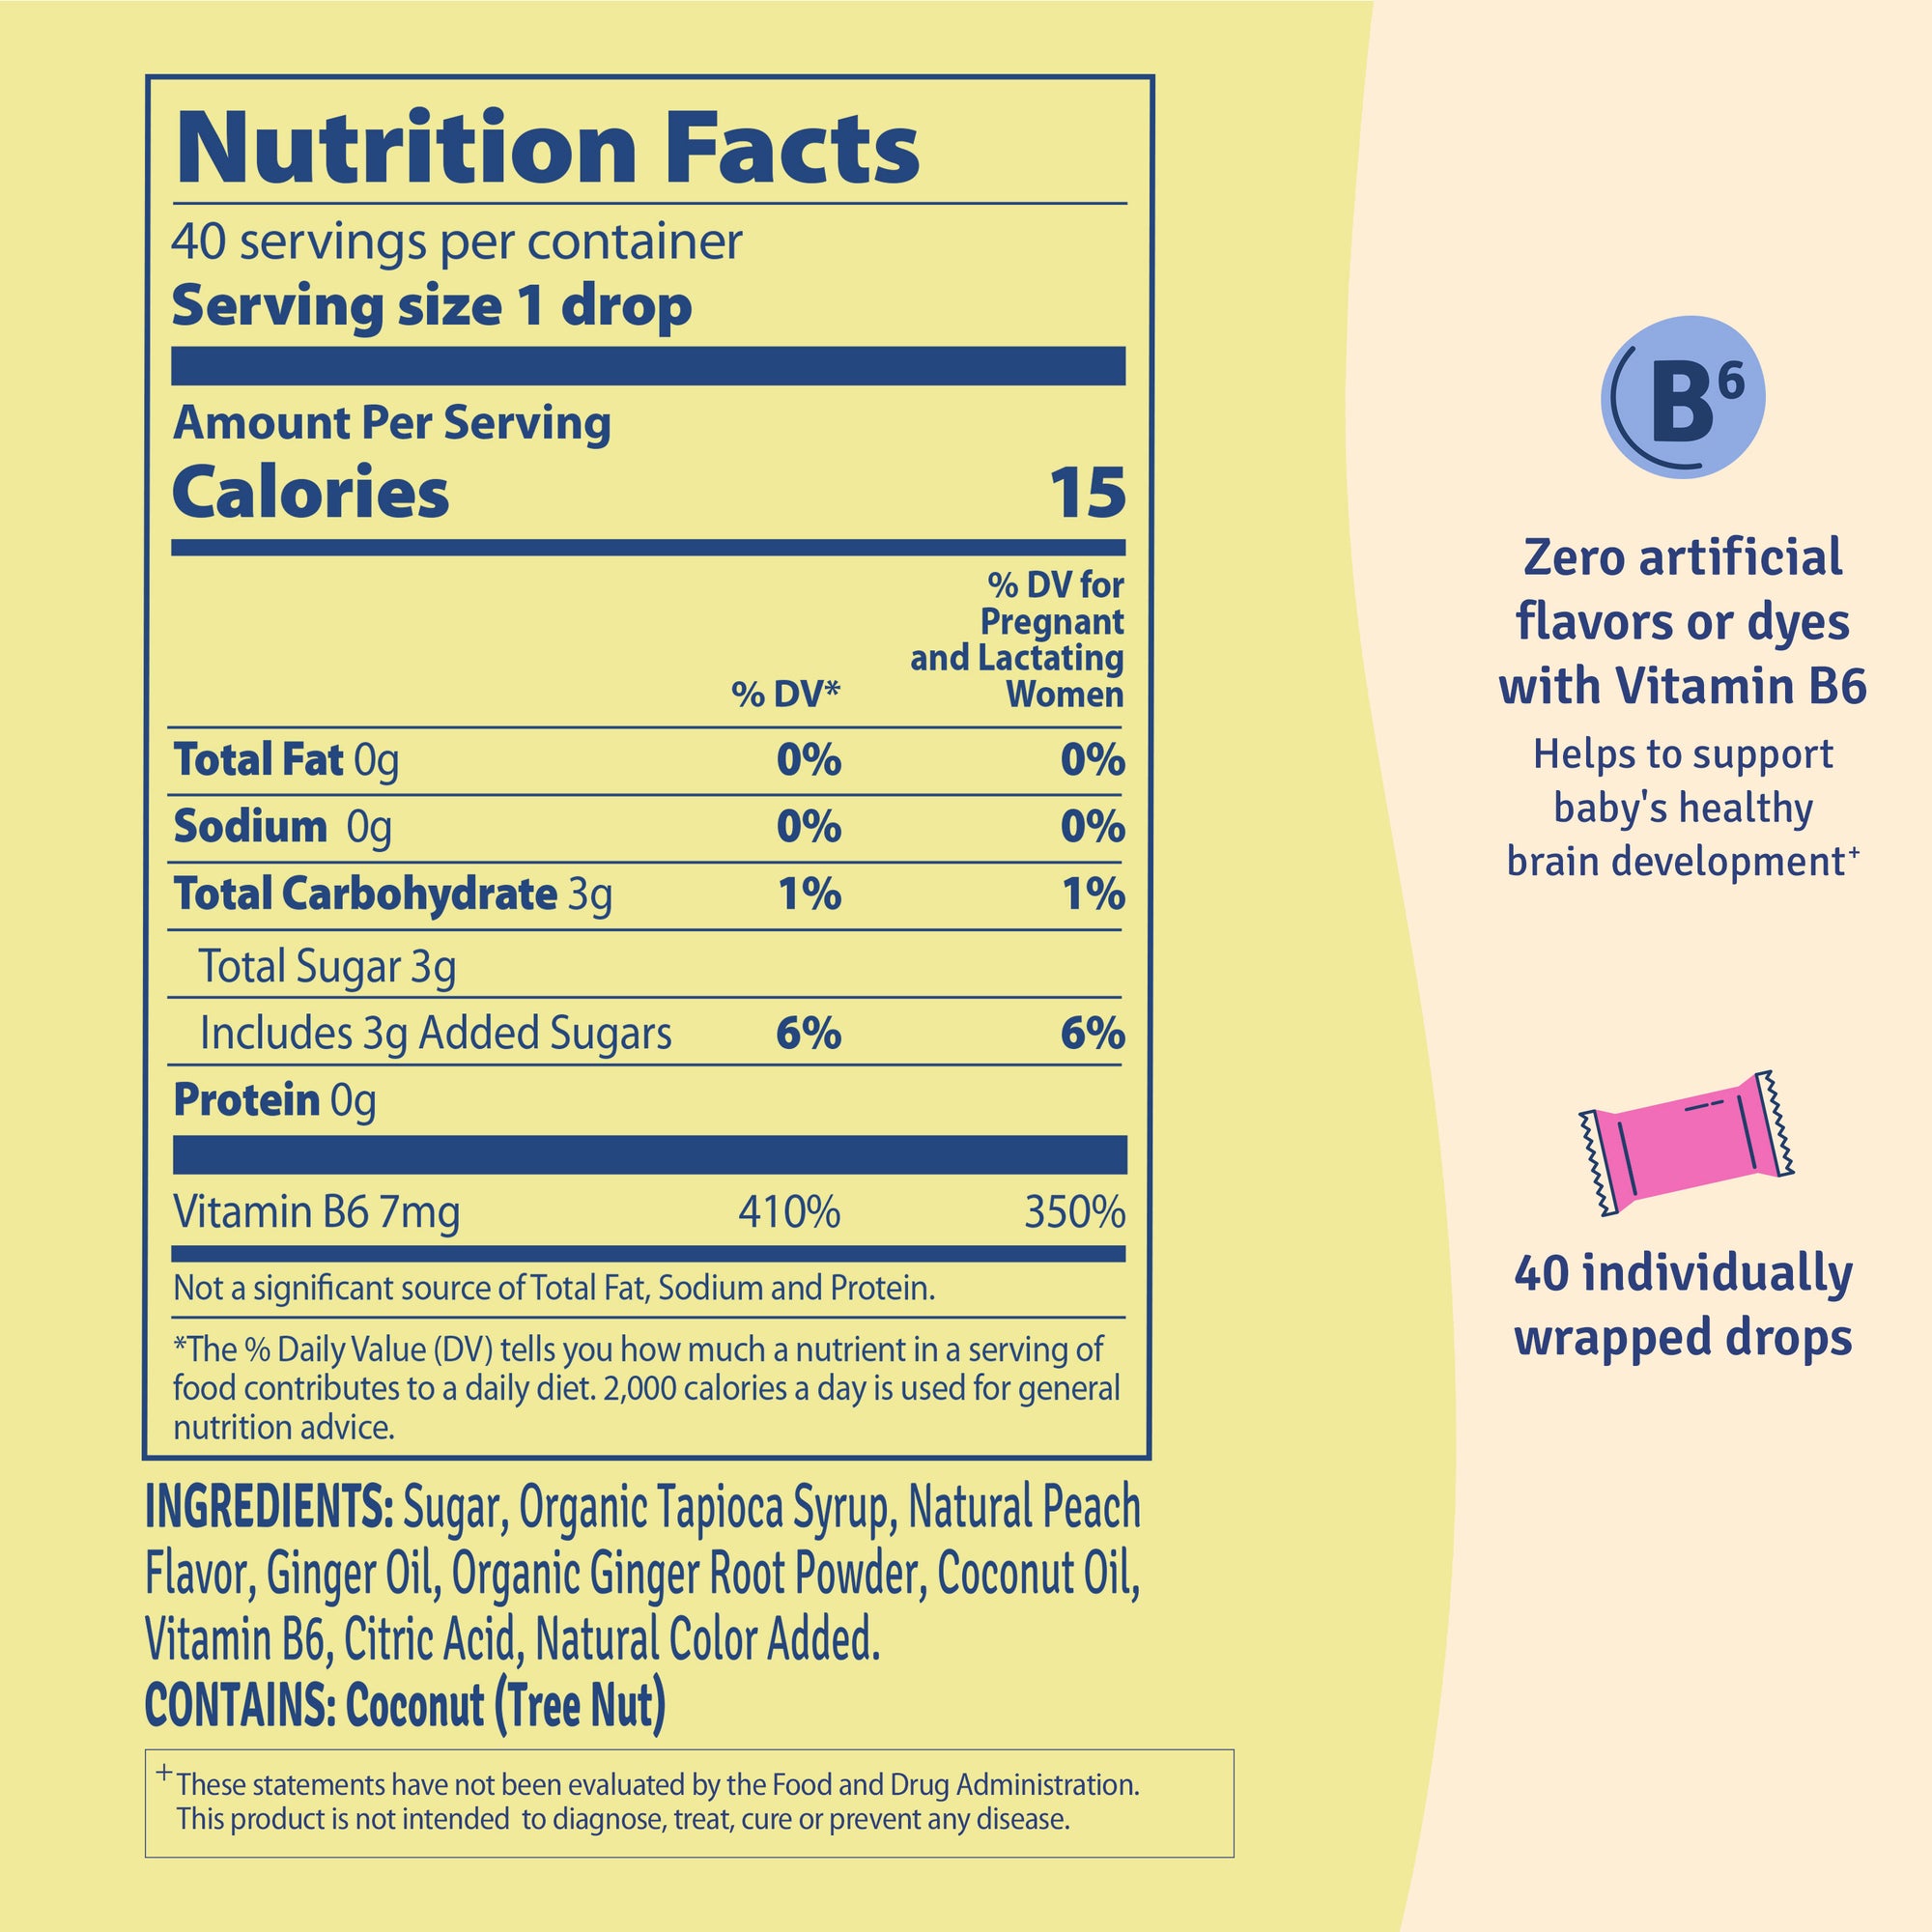 Sweetie Pie Organics Peach Ginger - Nutrition Facts Label